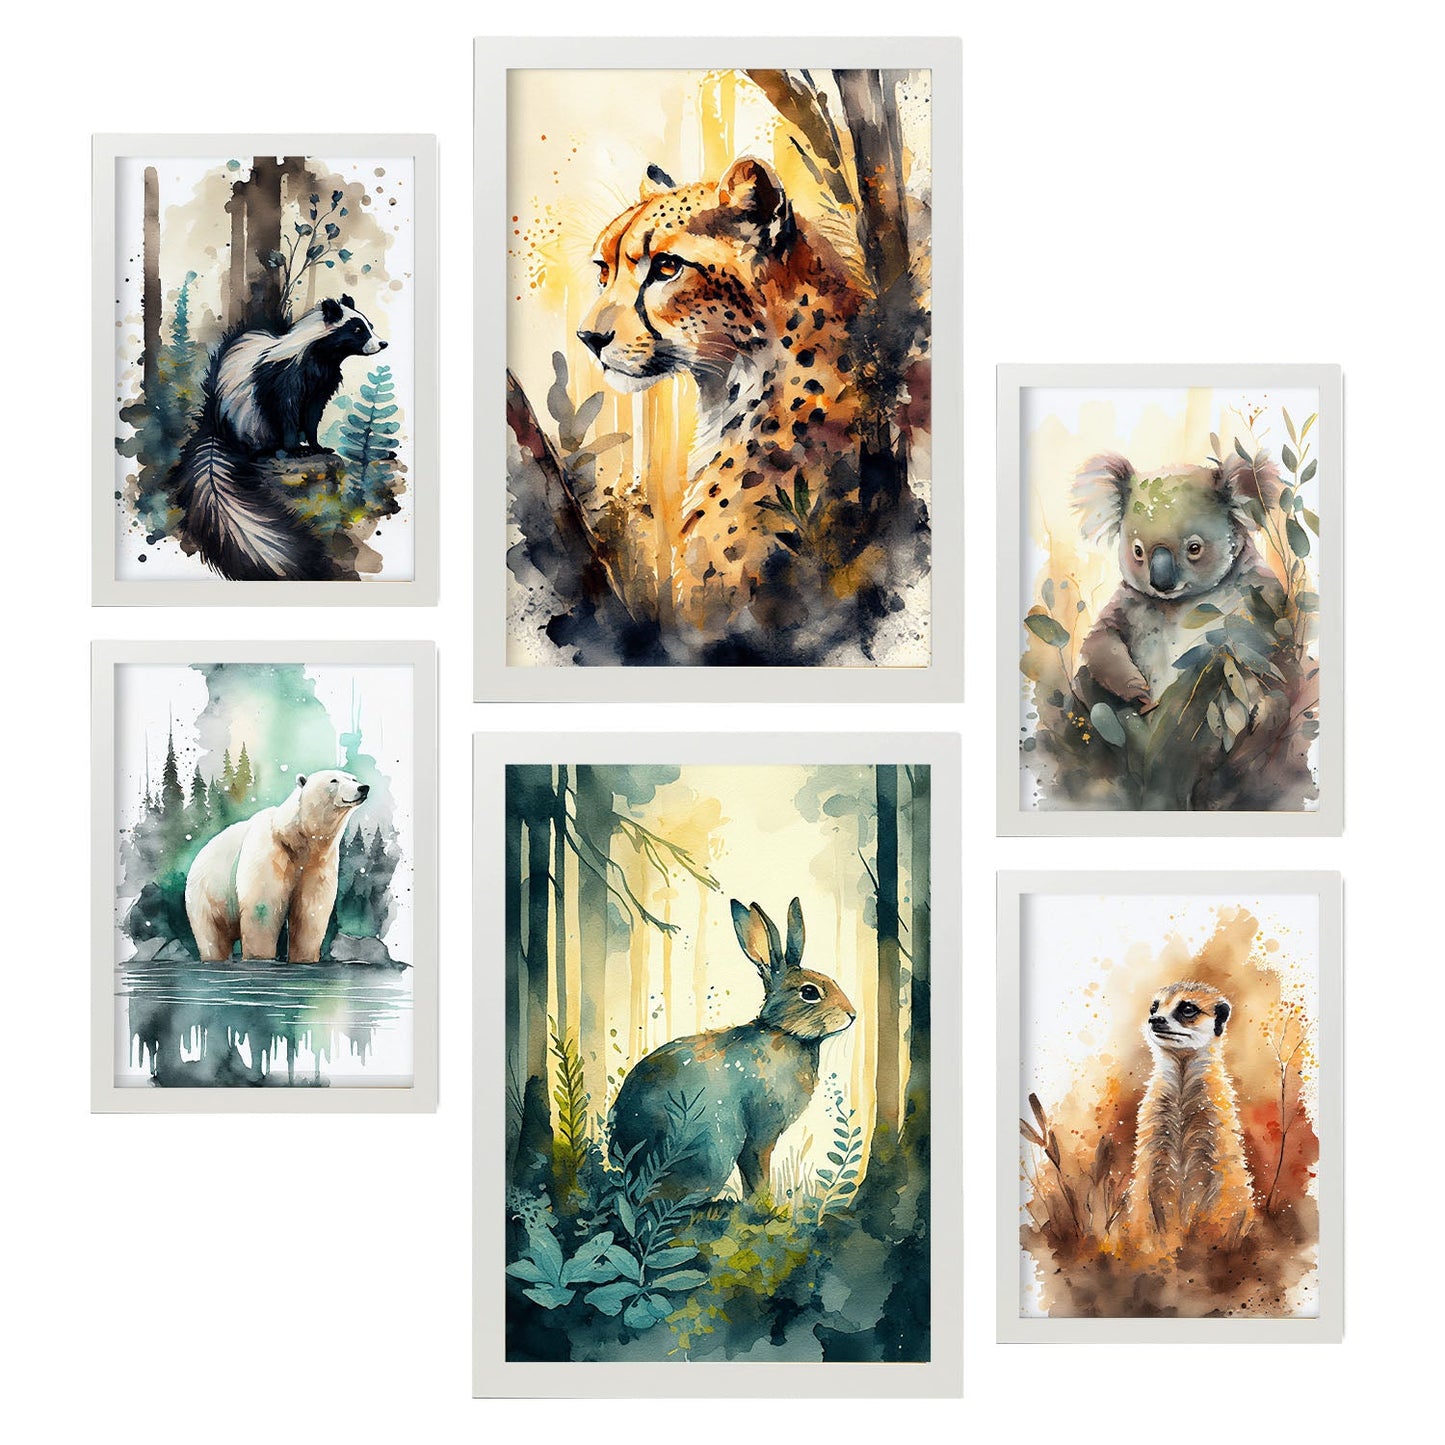 Nacnic Watercolor Animal Set_2. Aesthetic Wall Art Prints for Bedroom or Living Room Design.